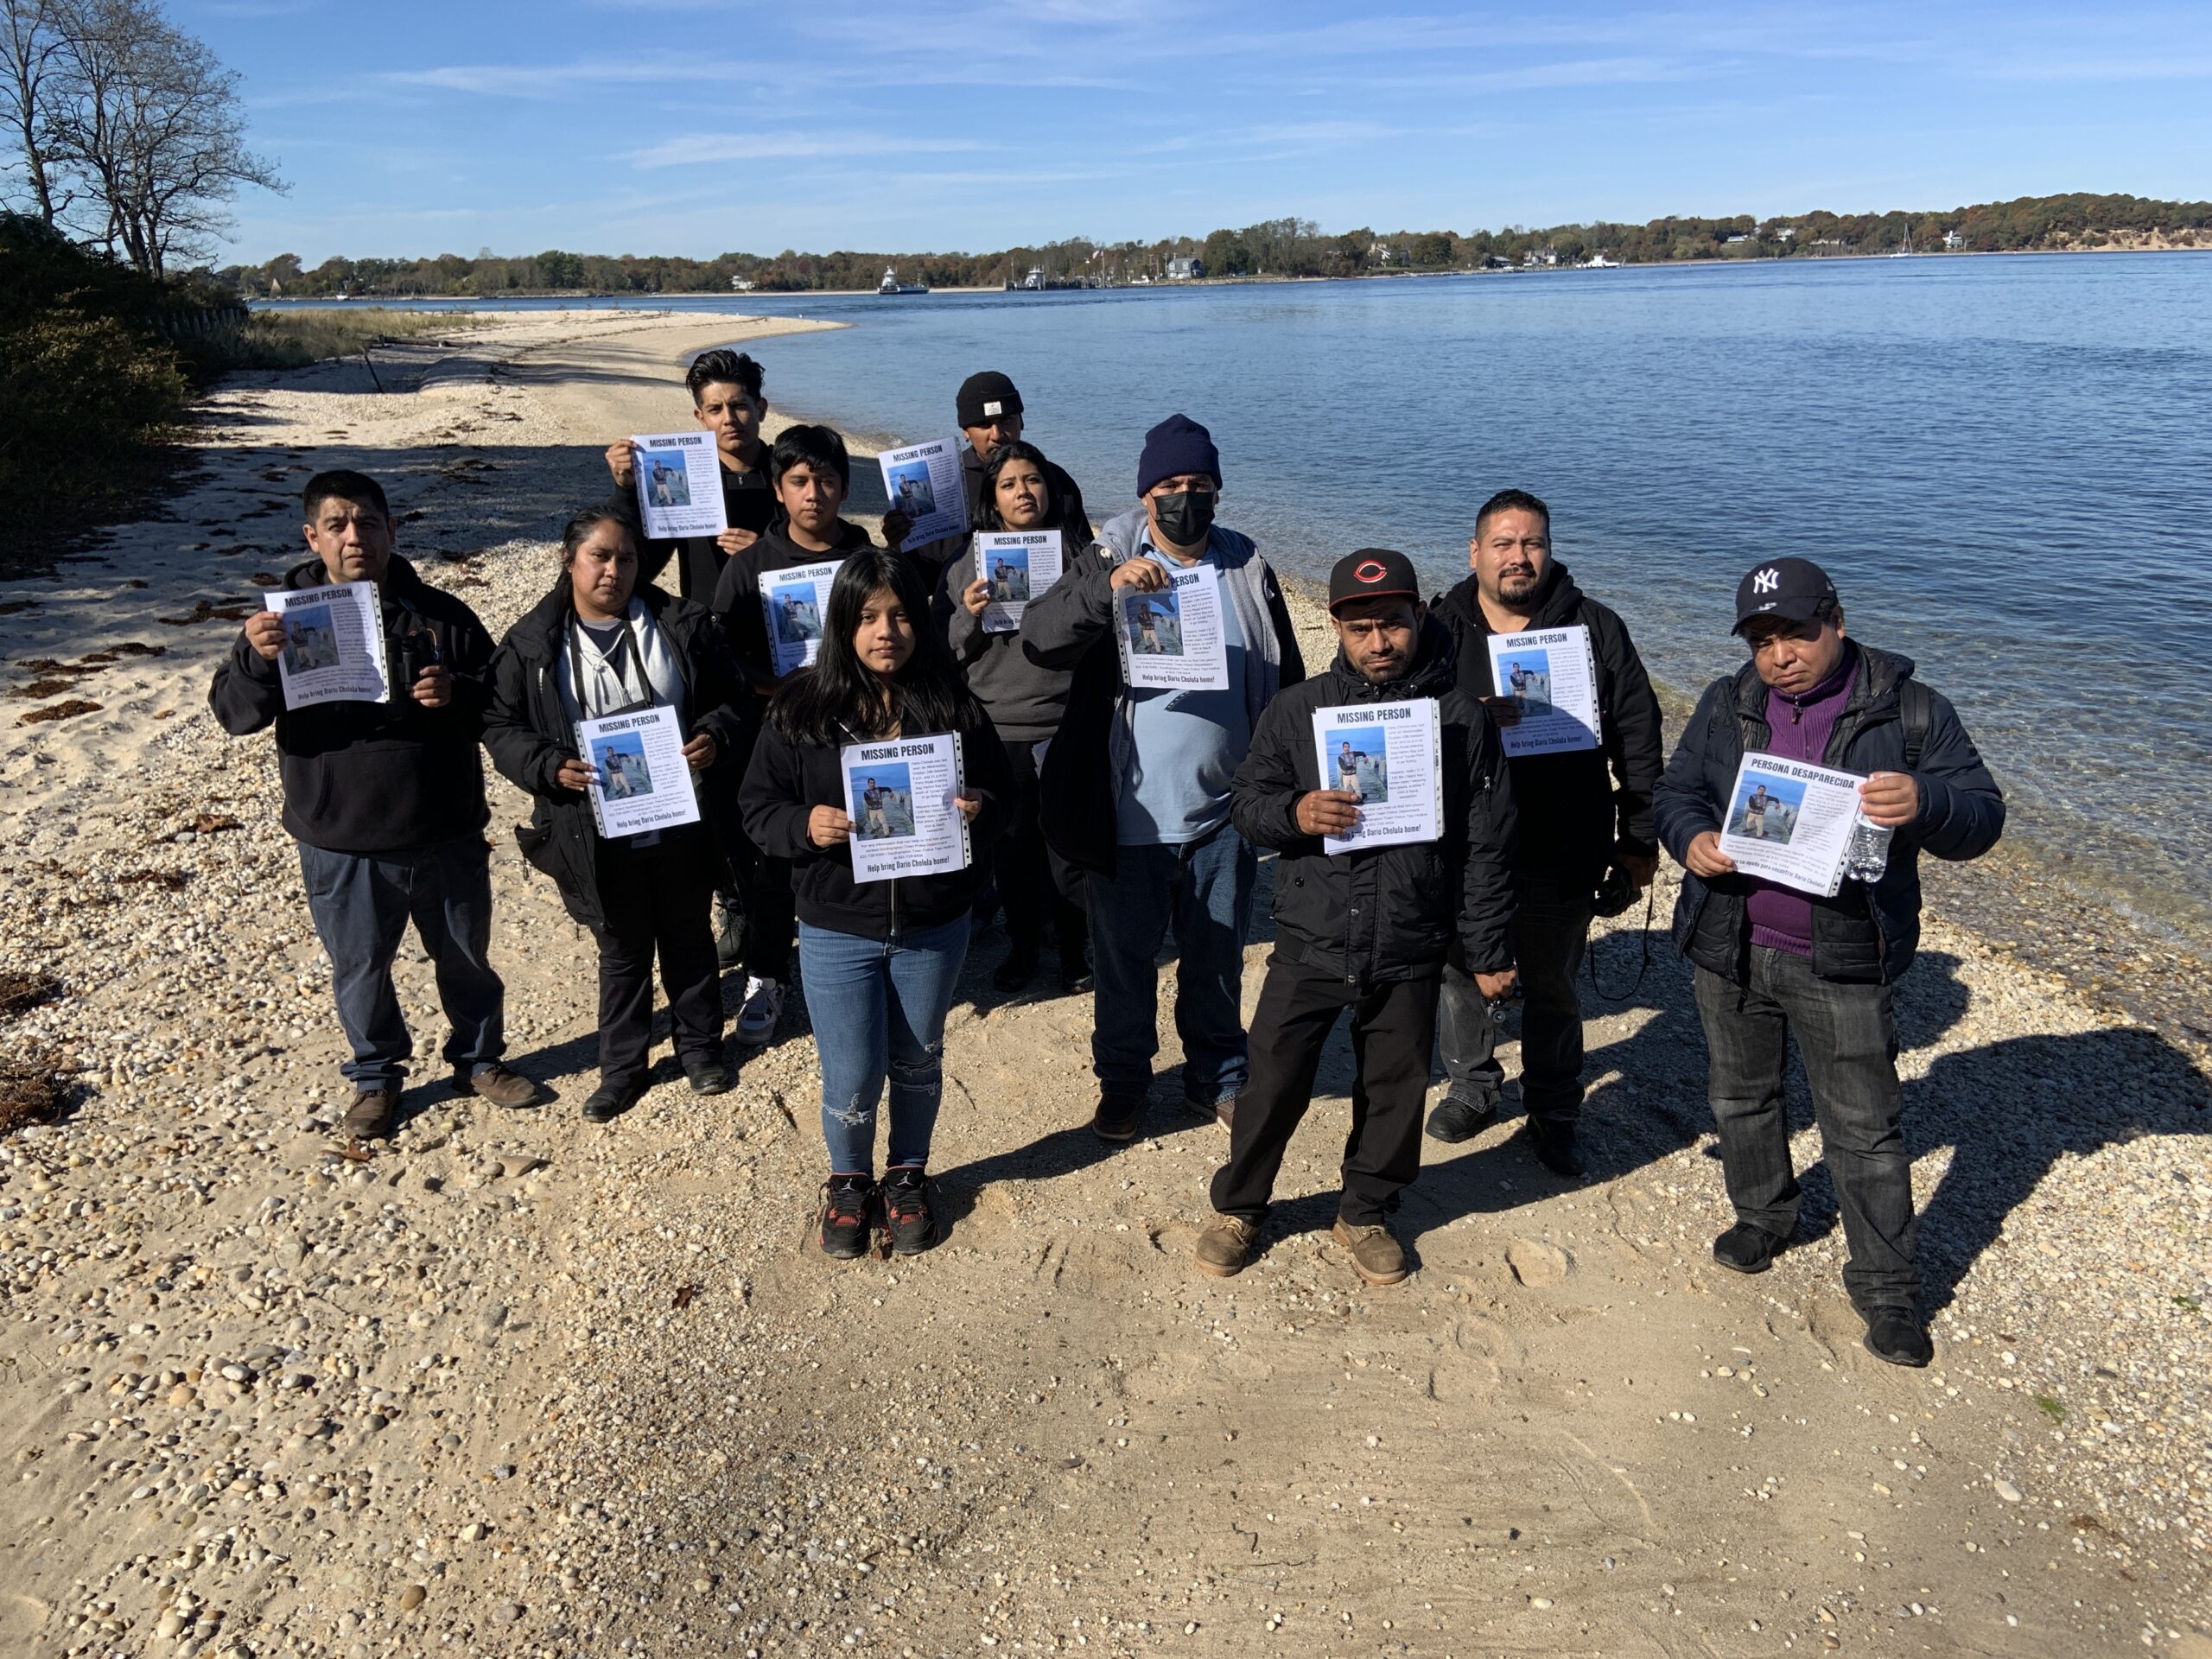 Family members of Dario Cholula Rojas, who disappeared on the night of October 19 when he went out on a kayak to fish, gathered in North Haven on Sunday to search the shoreline for his body. STEPHEN J. KOTZ